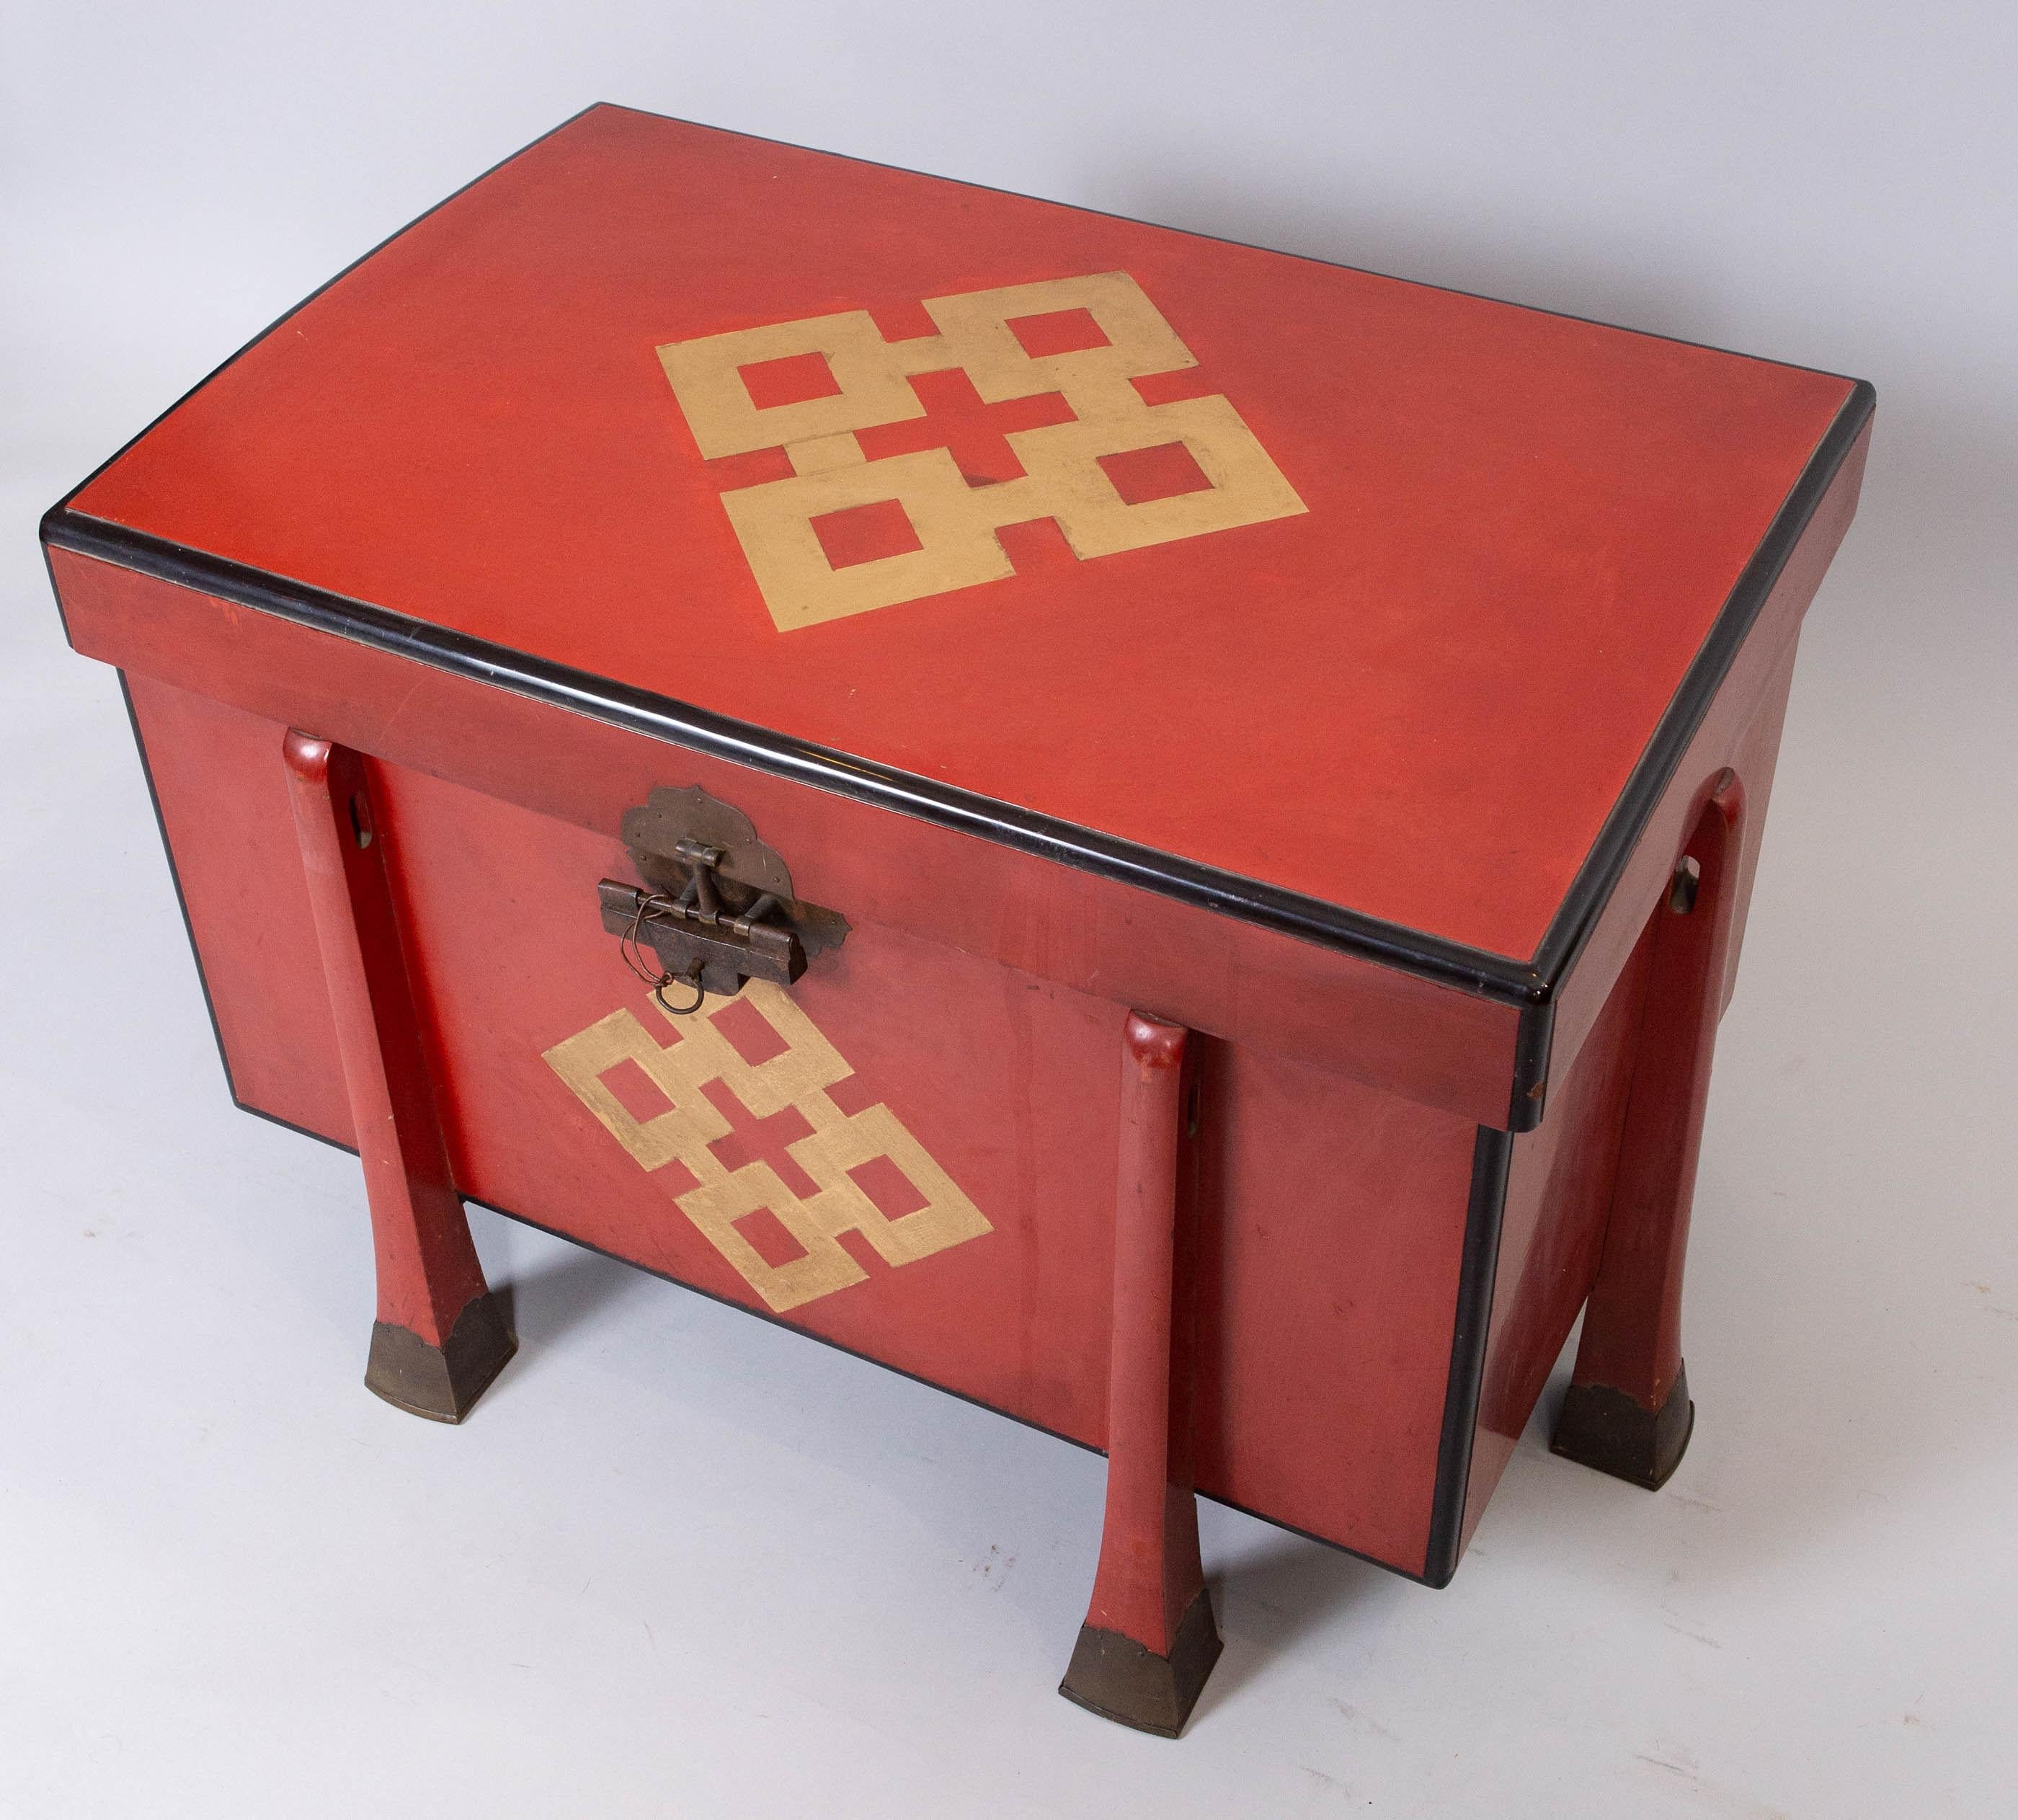 6-legged armor box made of red lacquer with crest design in gold, and bronze mounted feet. Comes with original lock and key.